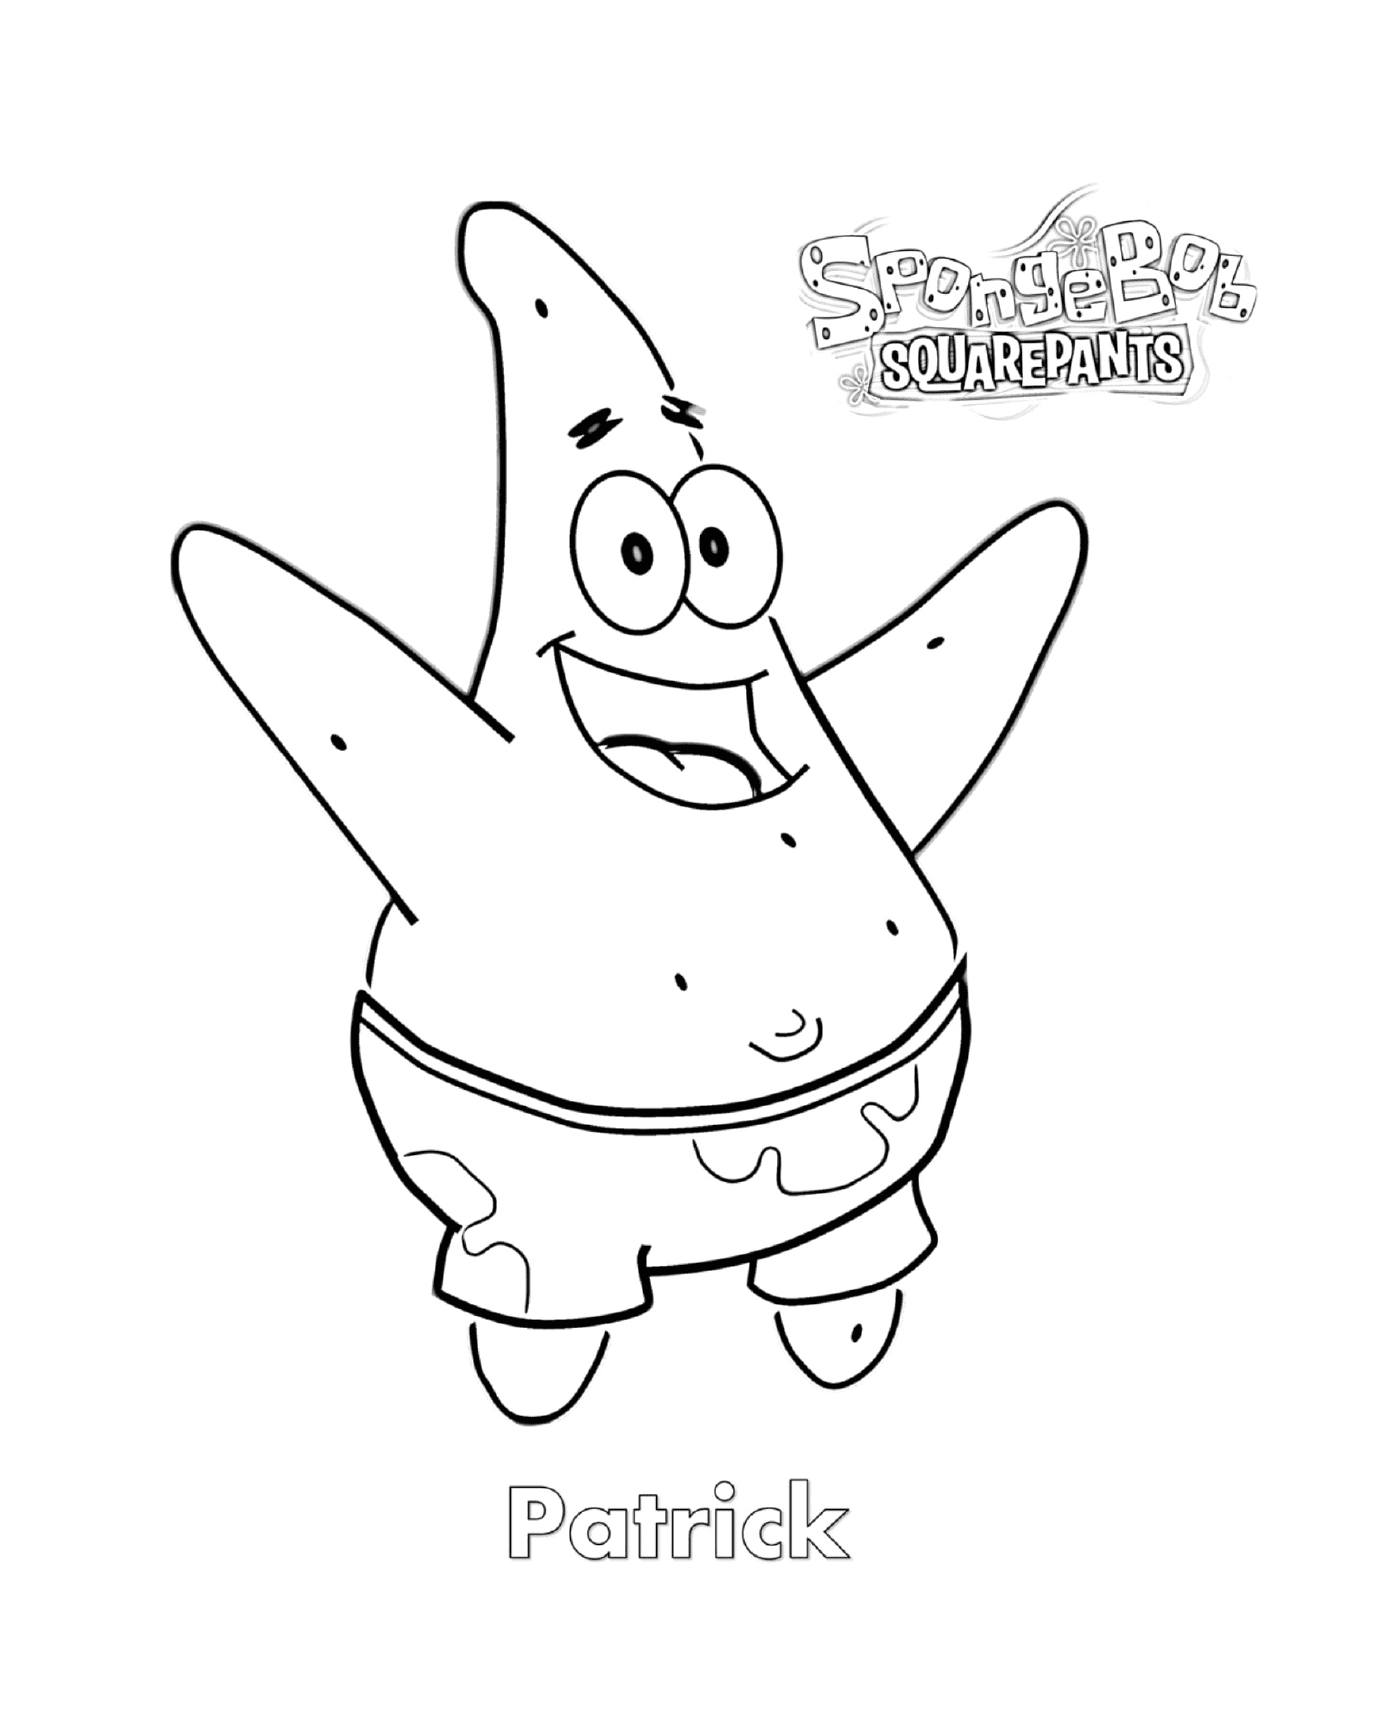  Patrick in good shape, a character from SpongeBob 